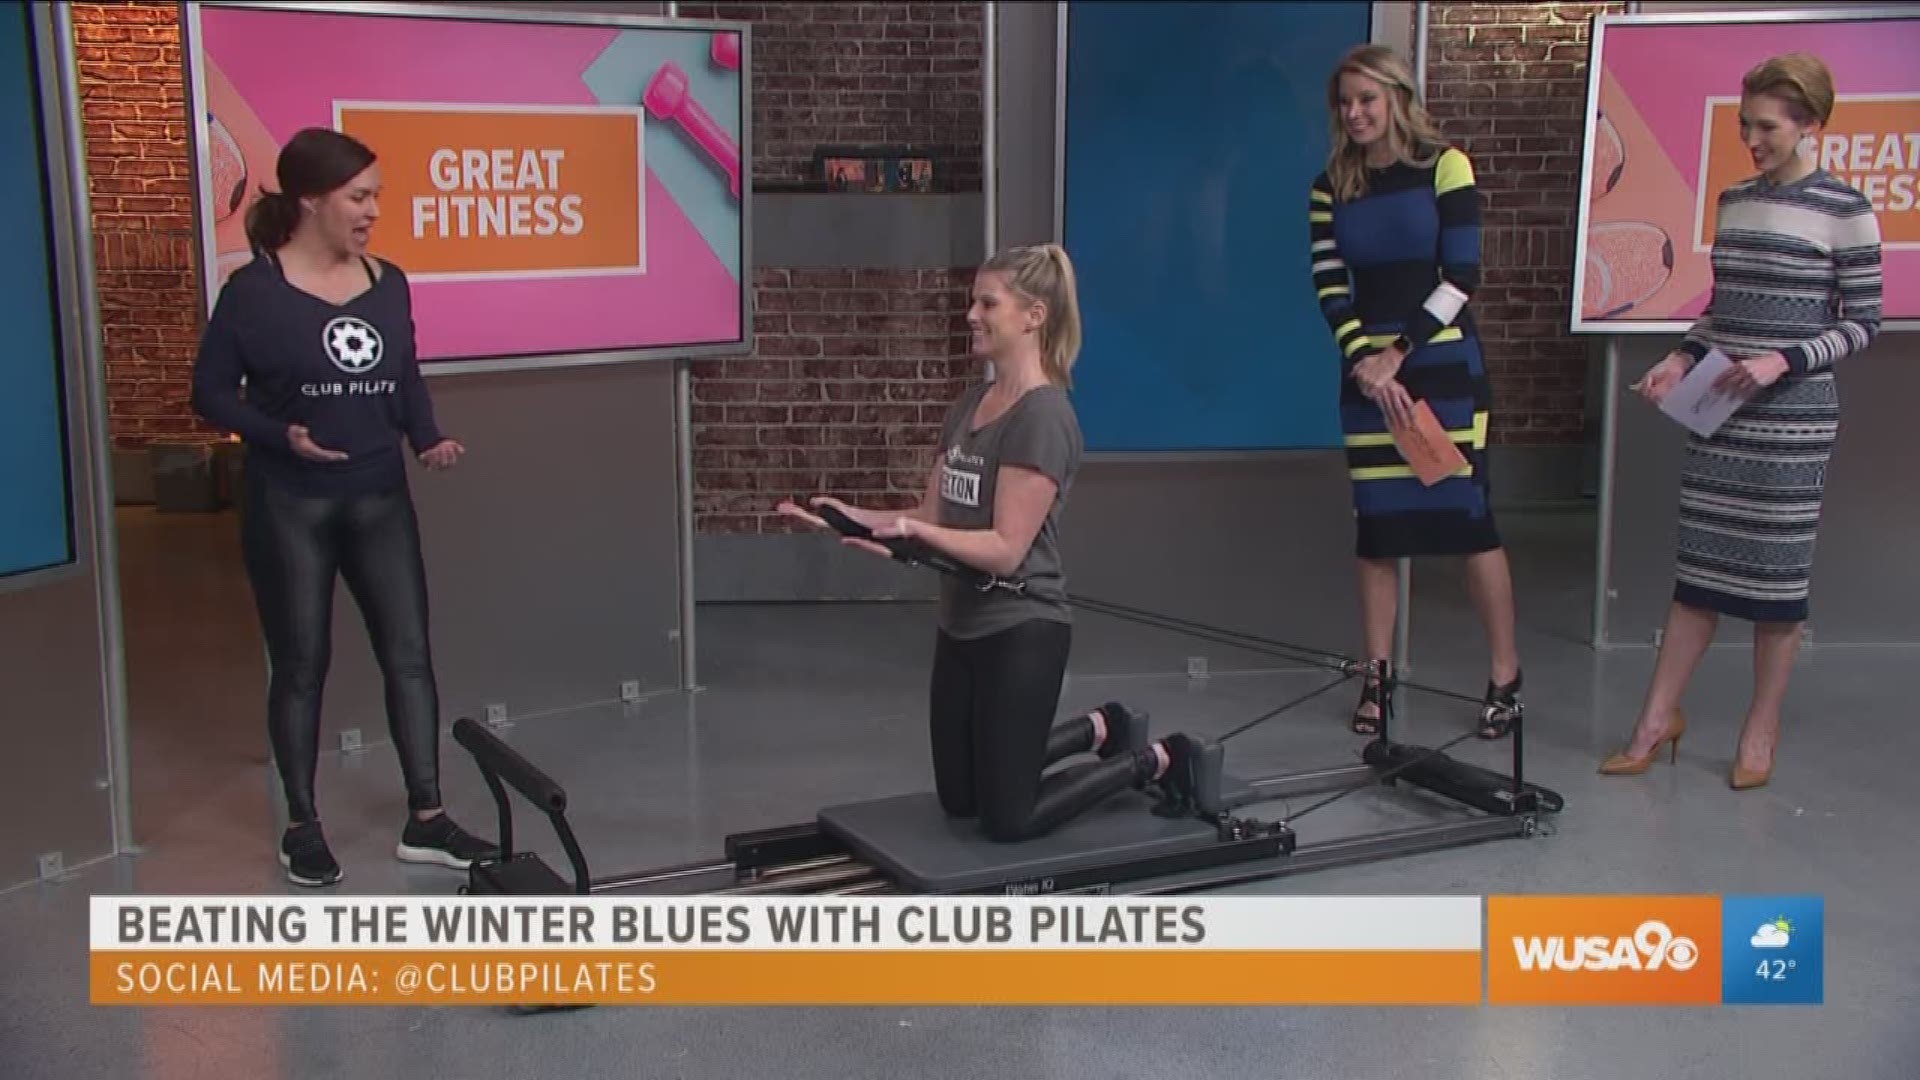 Sarah Mullen Hannett of Club Pilates explains how the pilates workout helps you decrease anxiety while you get in shape.